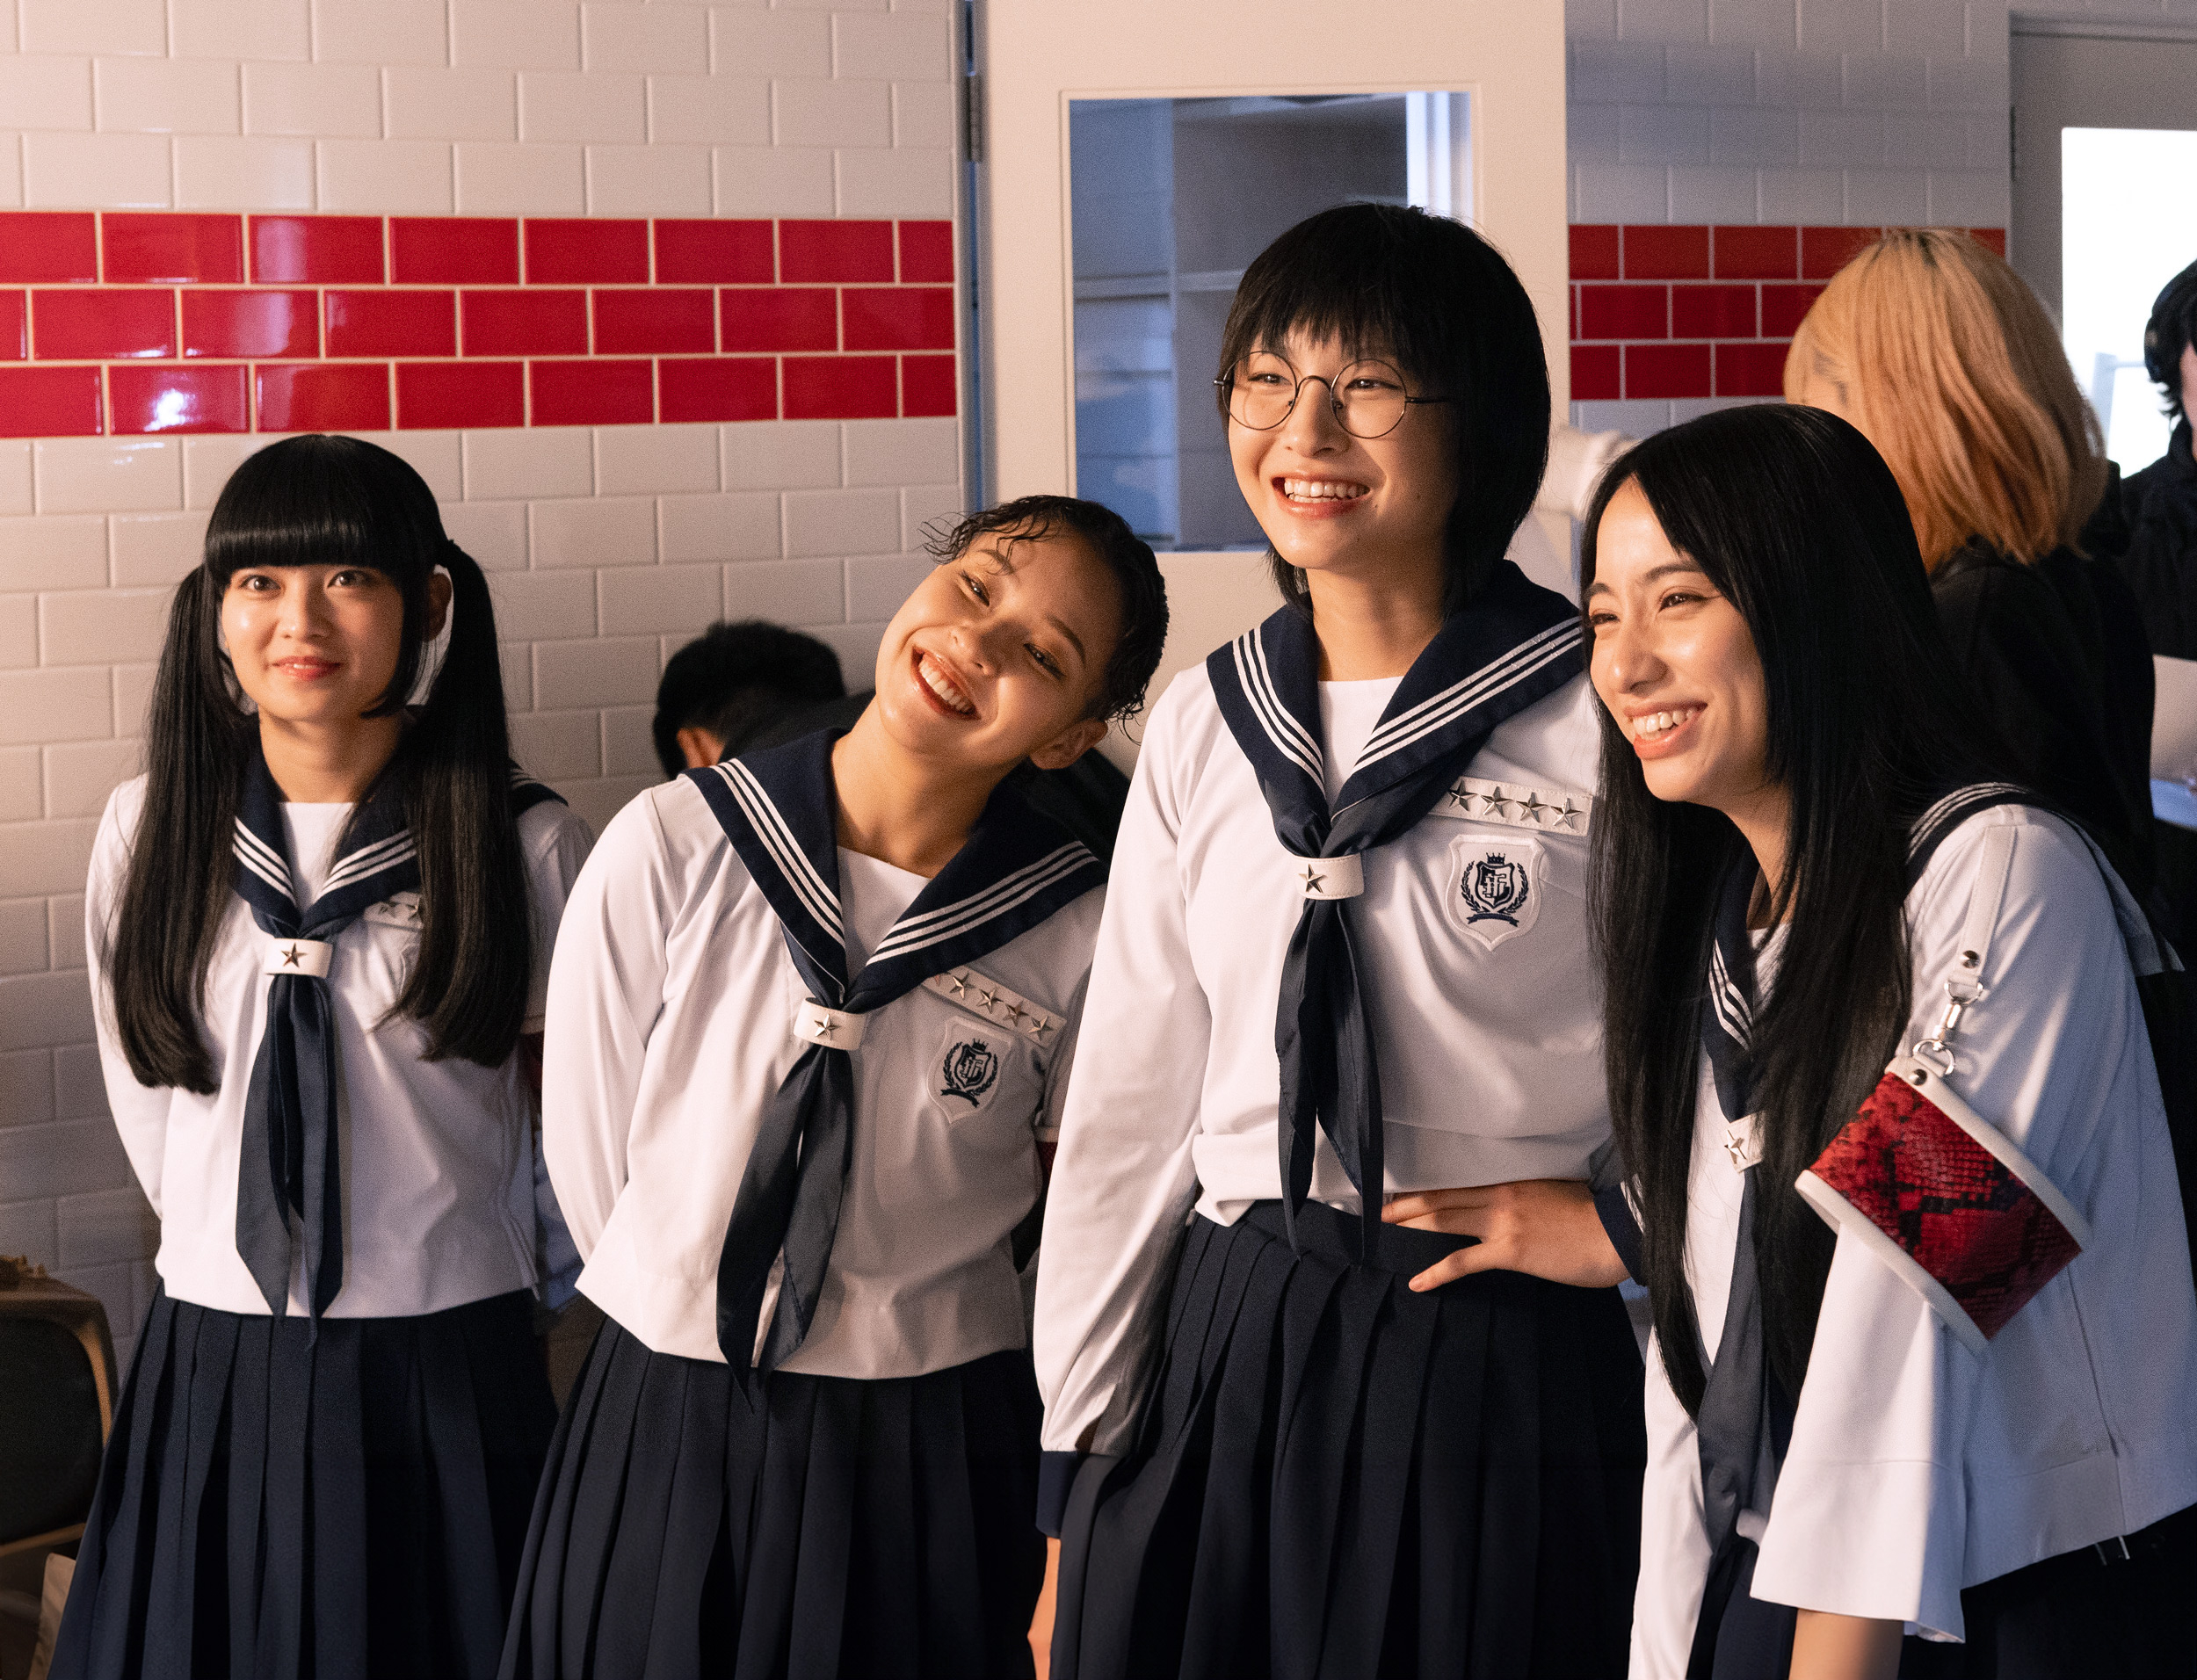 A group of girls in school uniforms